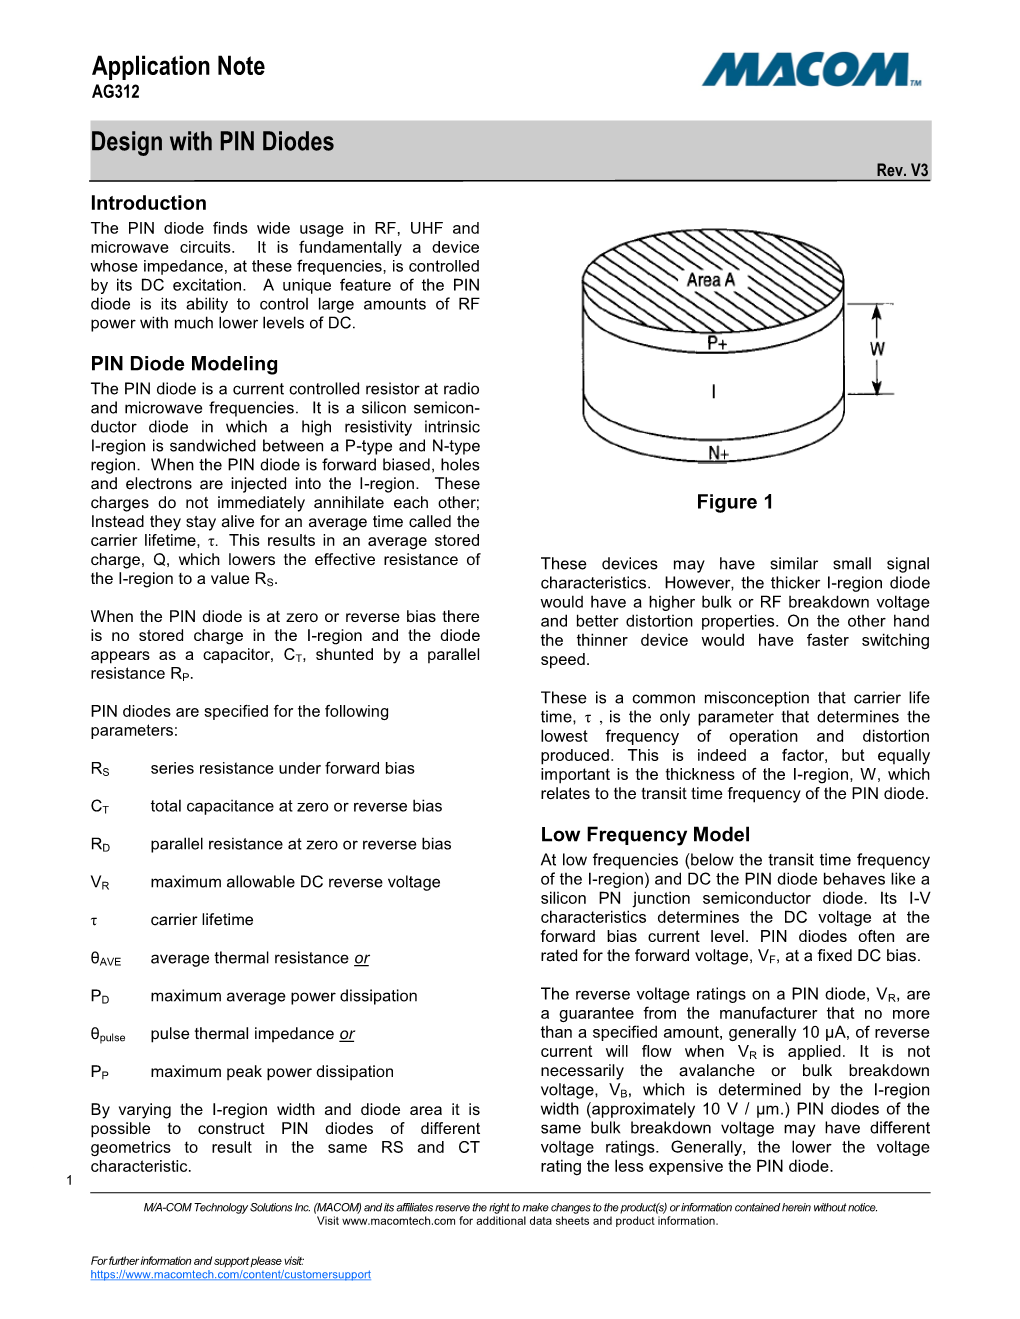 Design with PIN Diodes Application Note